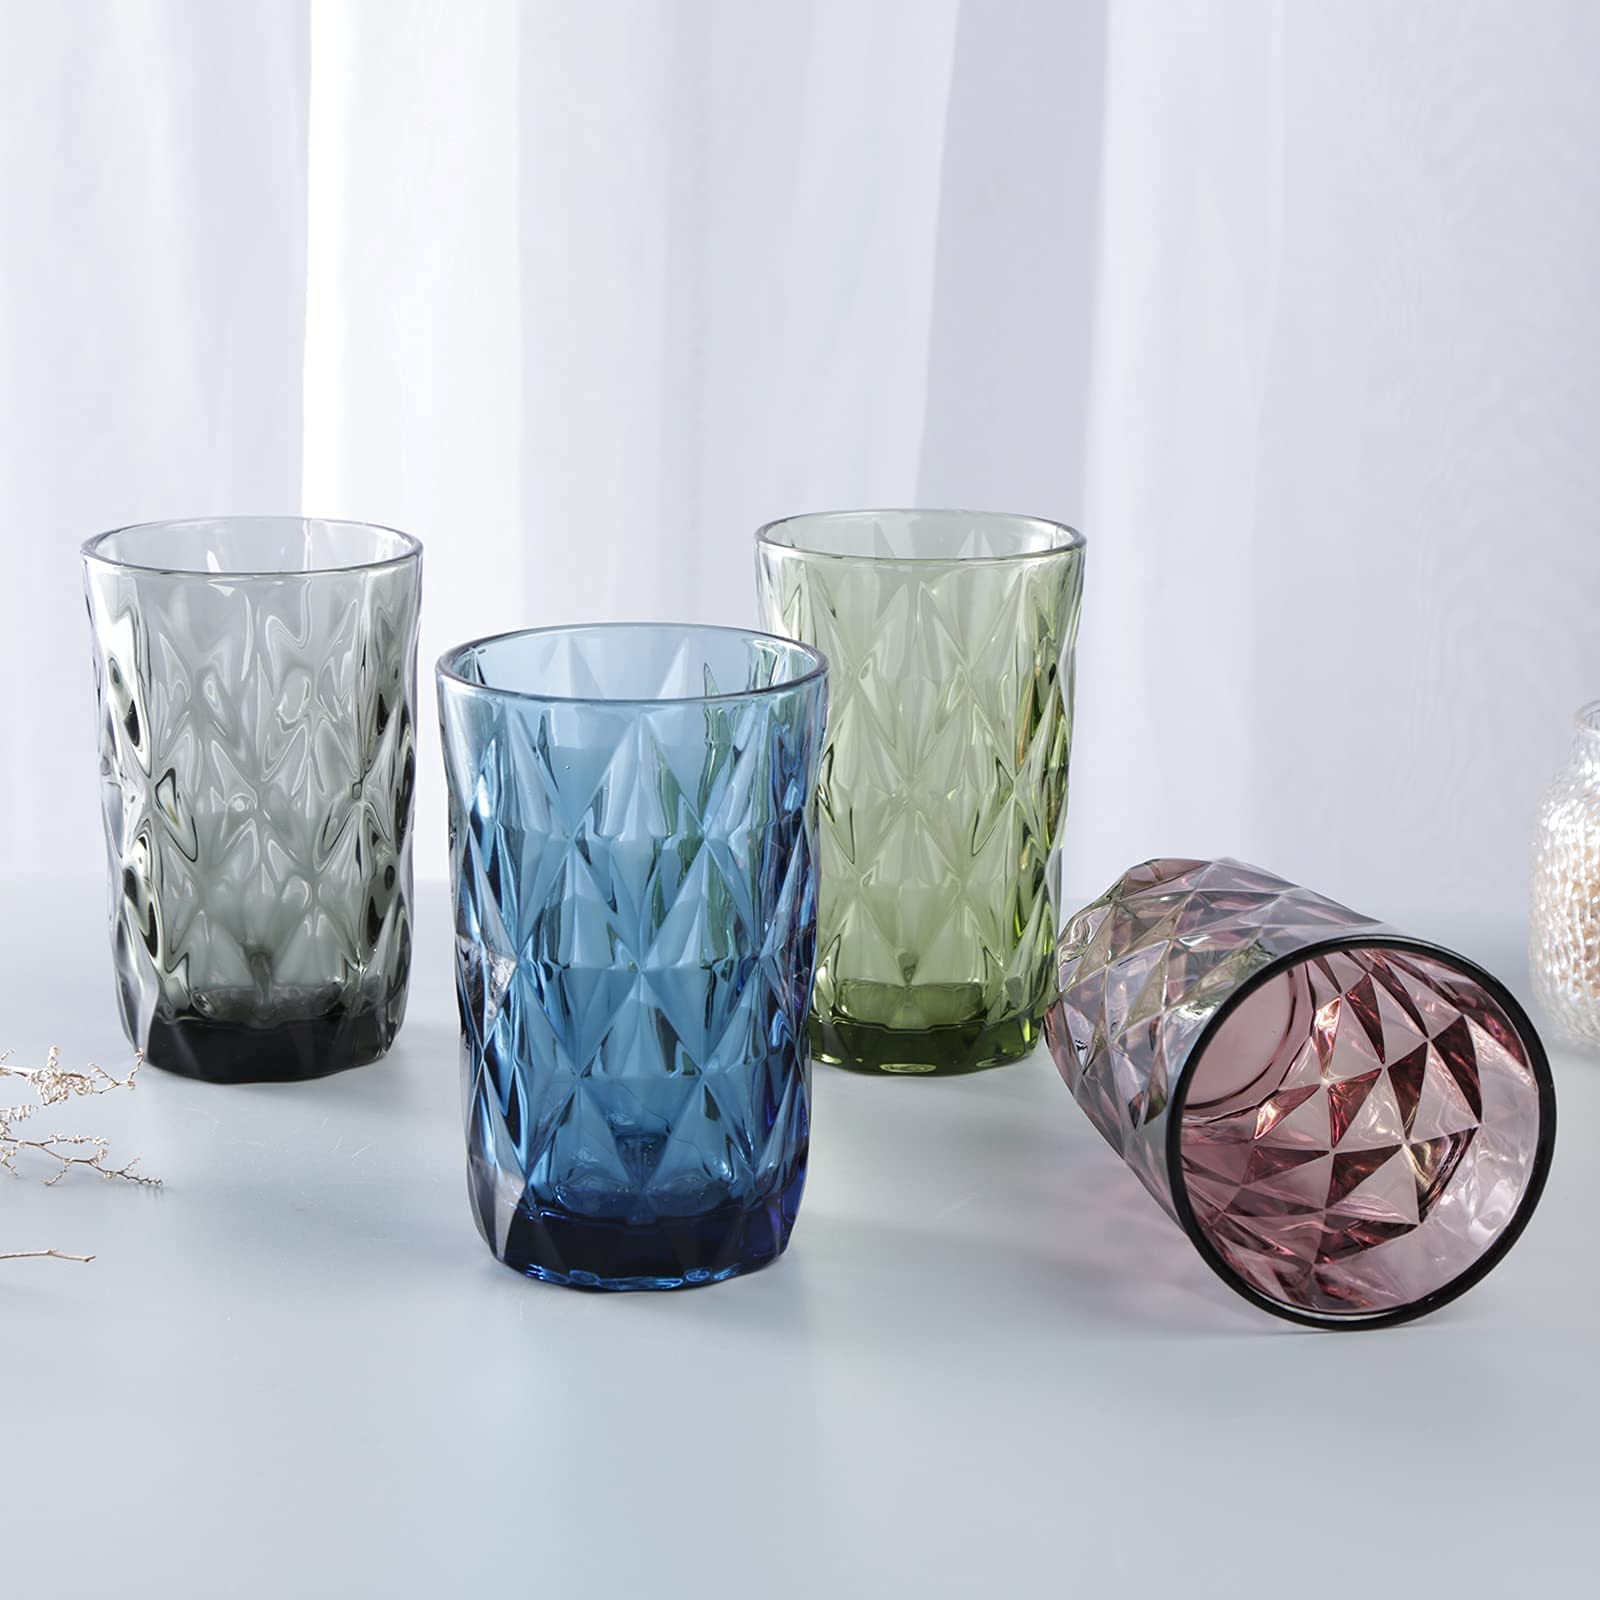 Bandesun Drinking Glass set of 6 Modern Glassware Diamond Pattern Tumbler Cup（12 OZ），for Water，Cocktail，Milk，Juice and Beverage